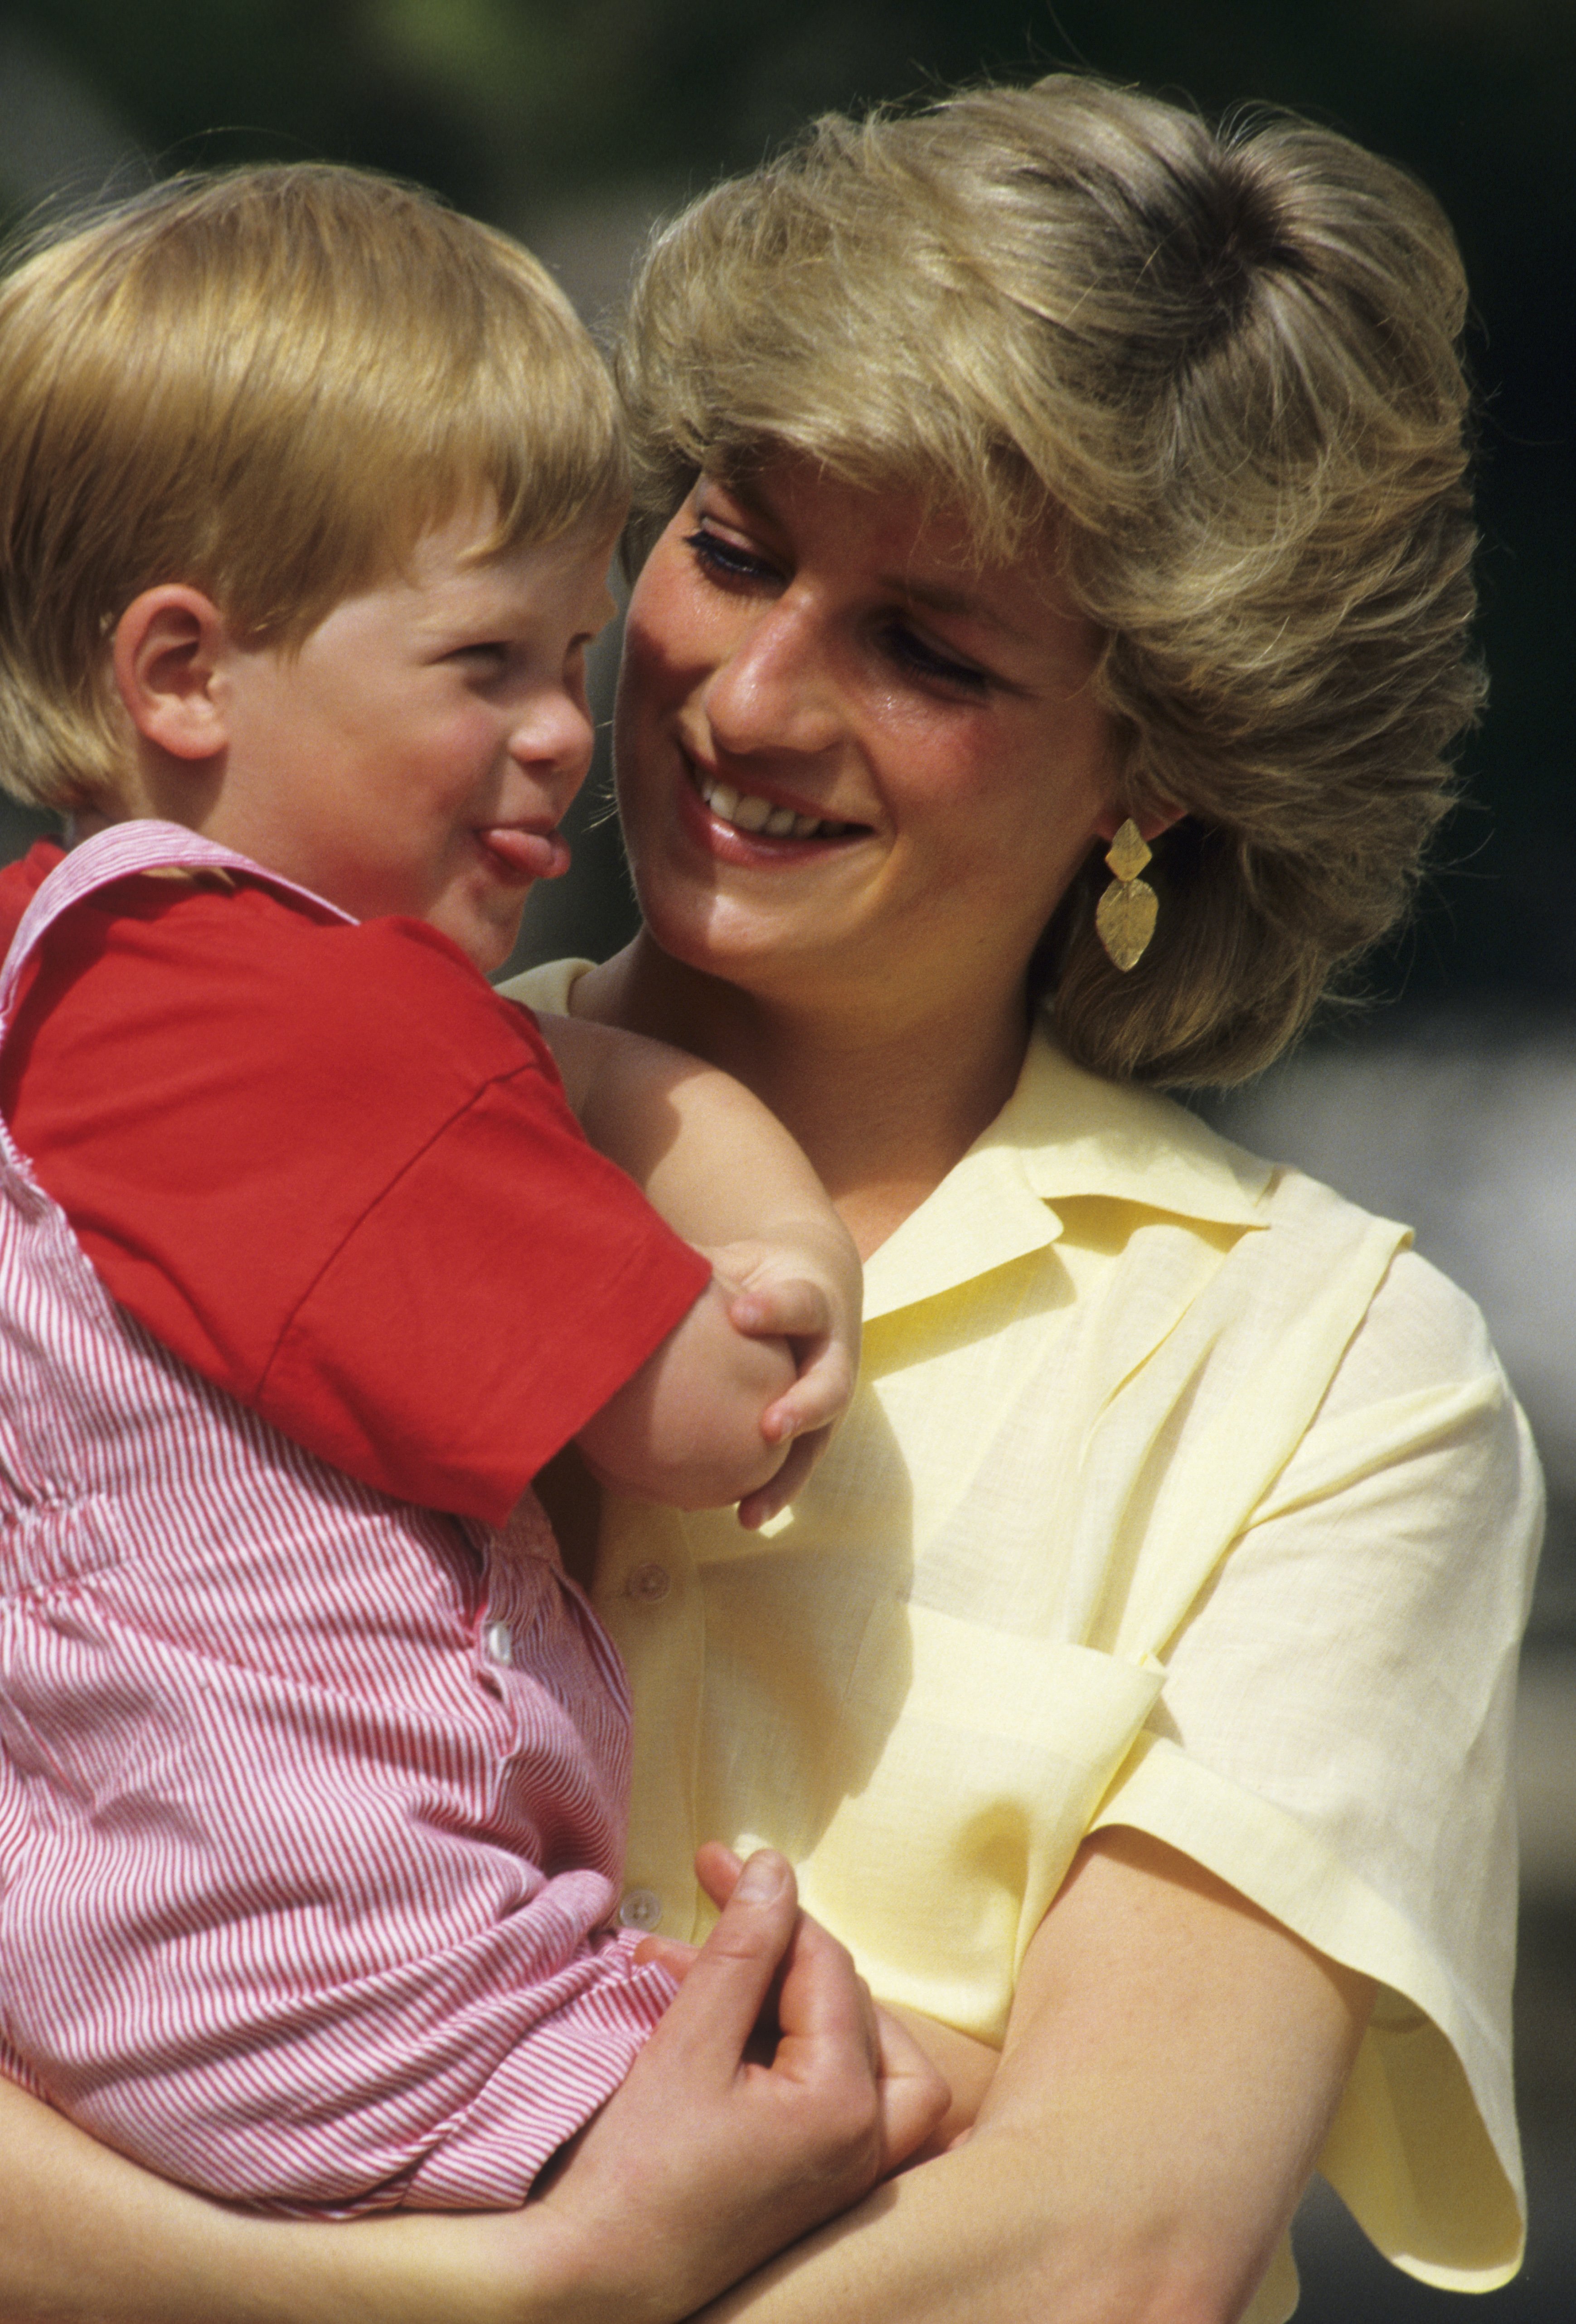 Princess Diana pictured with Prince Harry on holiday on August 10, 1987 in Majorca, Spain . | Source: Getty Images